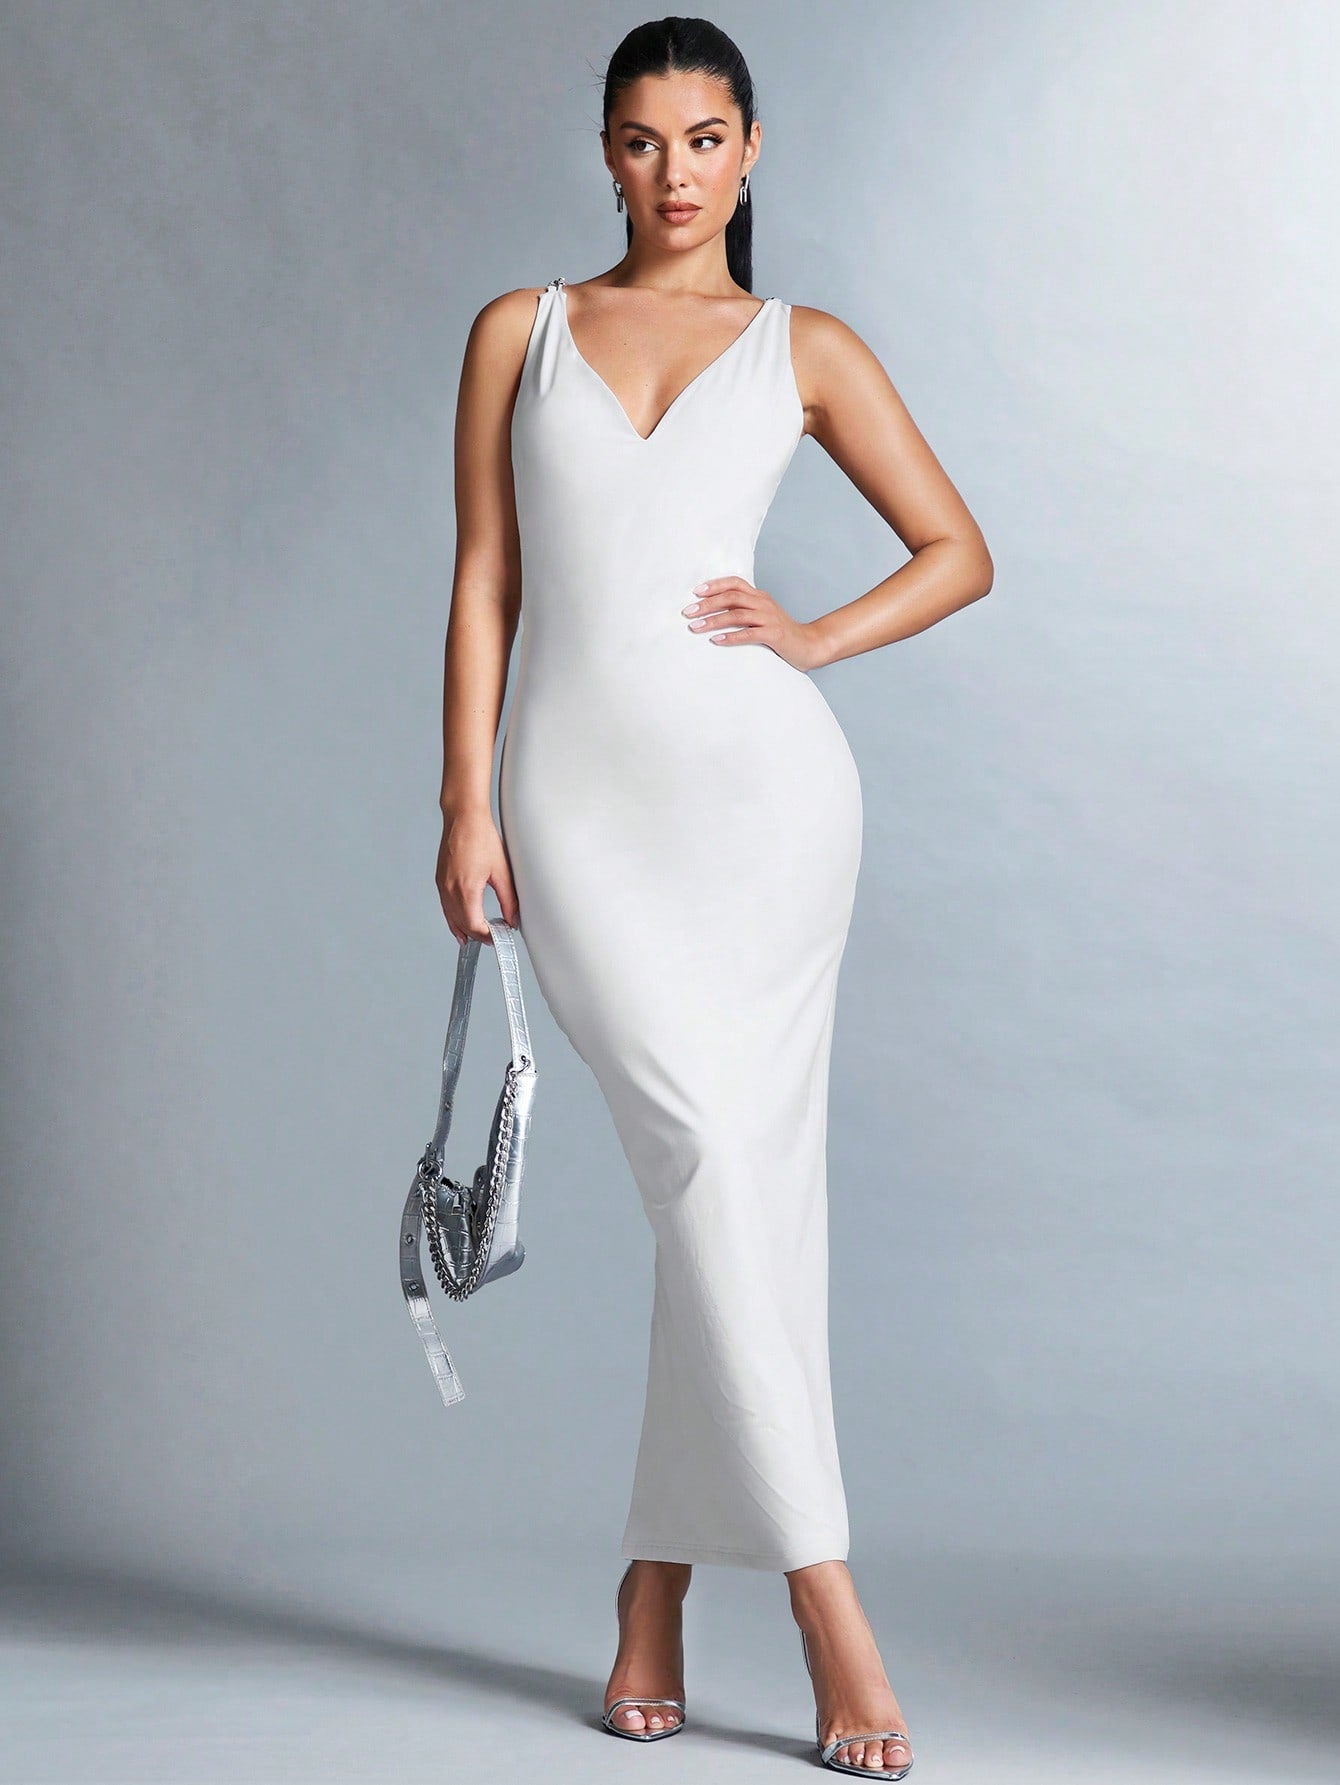 LLstyle Backless Pearl Chain Party Dress